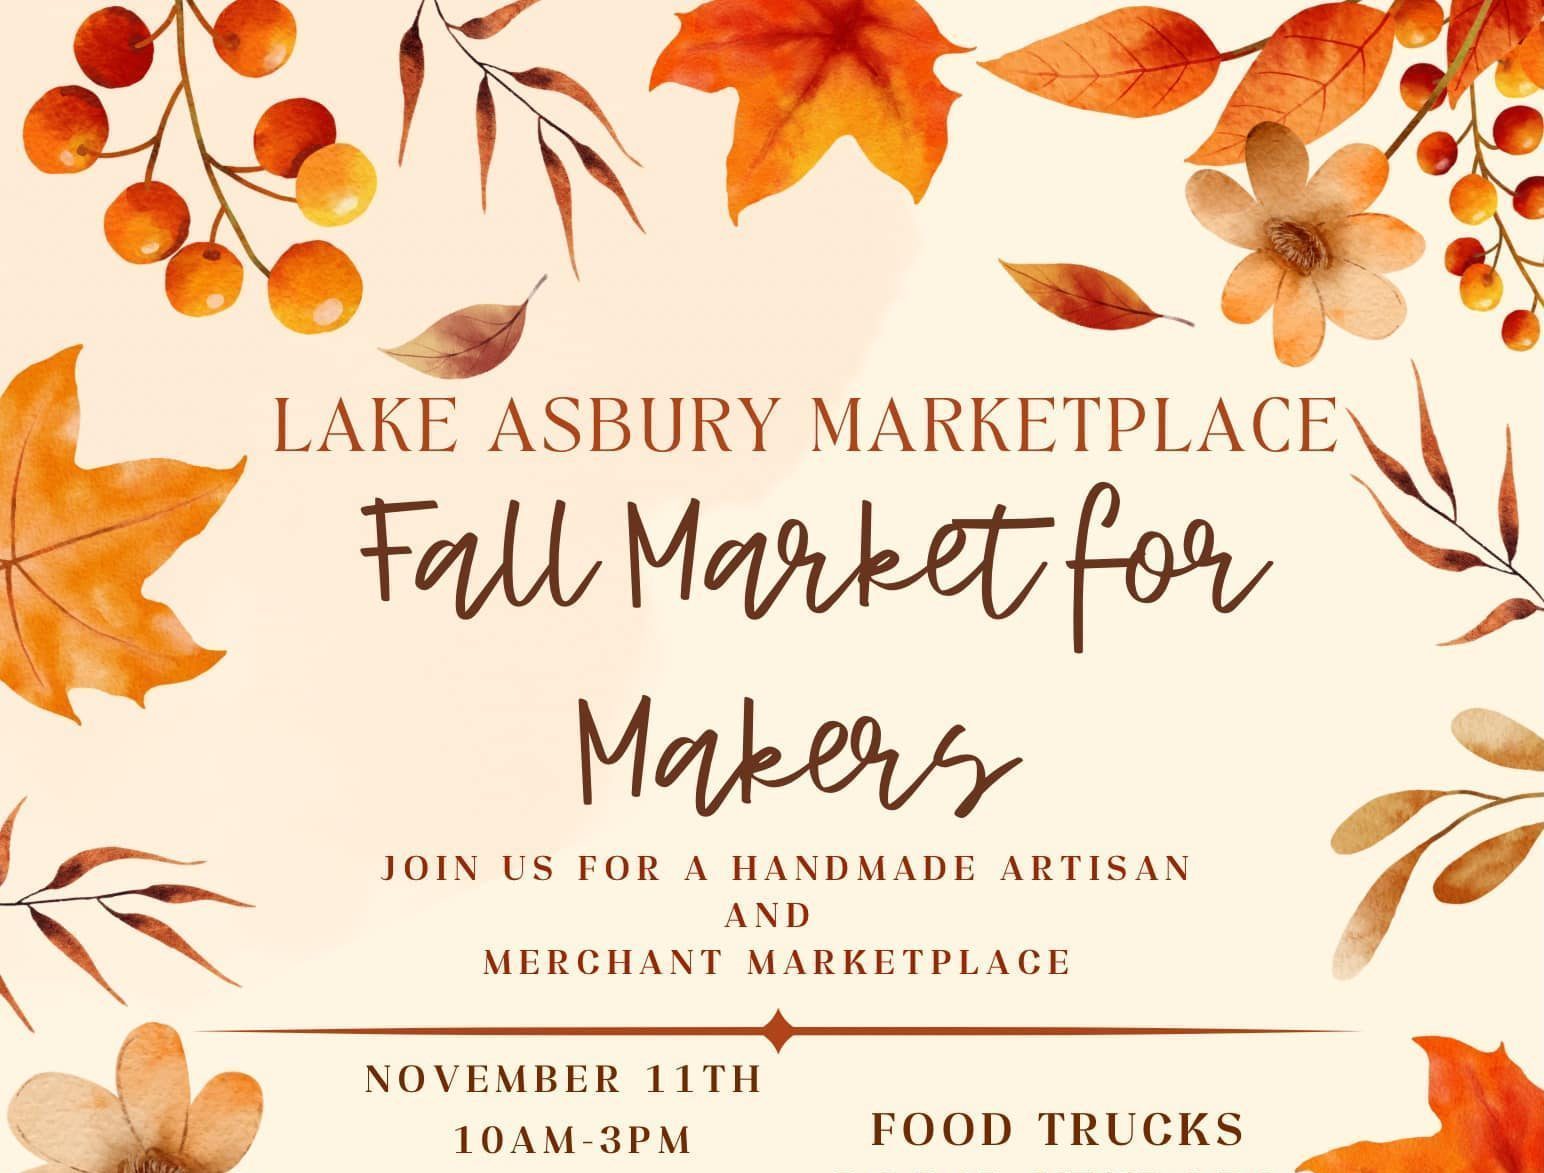 Lake Asbury Marketplace Fall Market for Makers Join Us for a Handmade Artisan and Merchant Marketplace! Food Trucks Local Vendors Shopping Family Fun